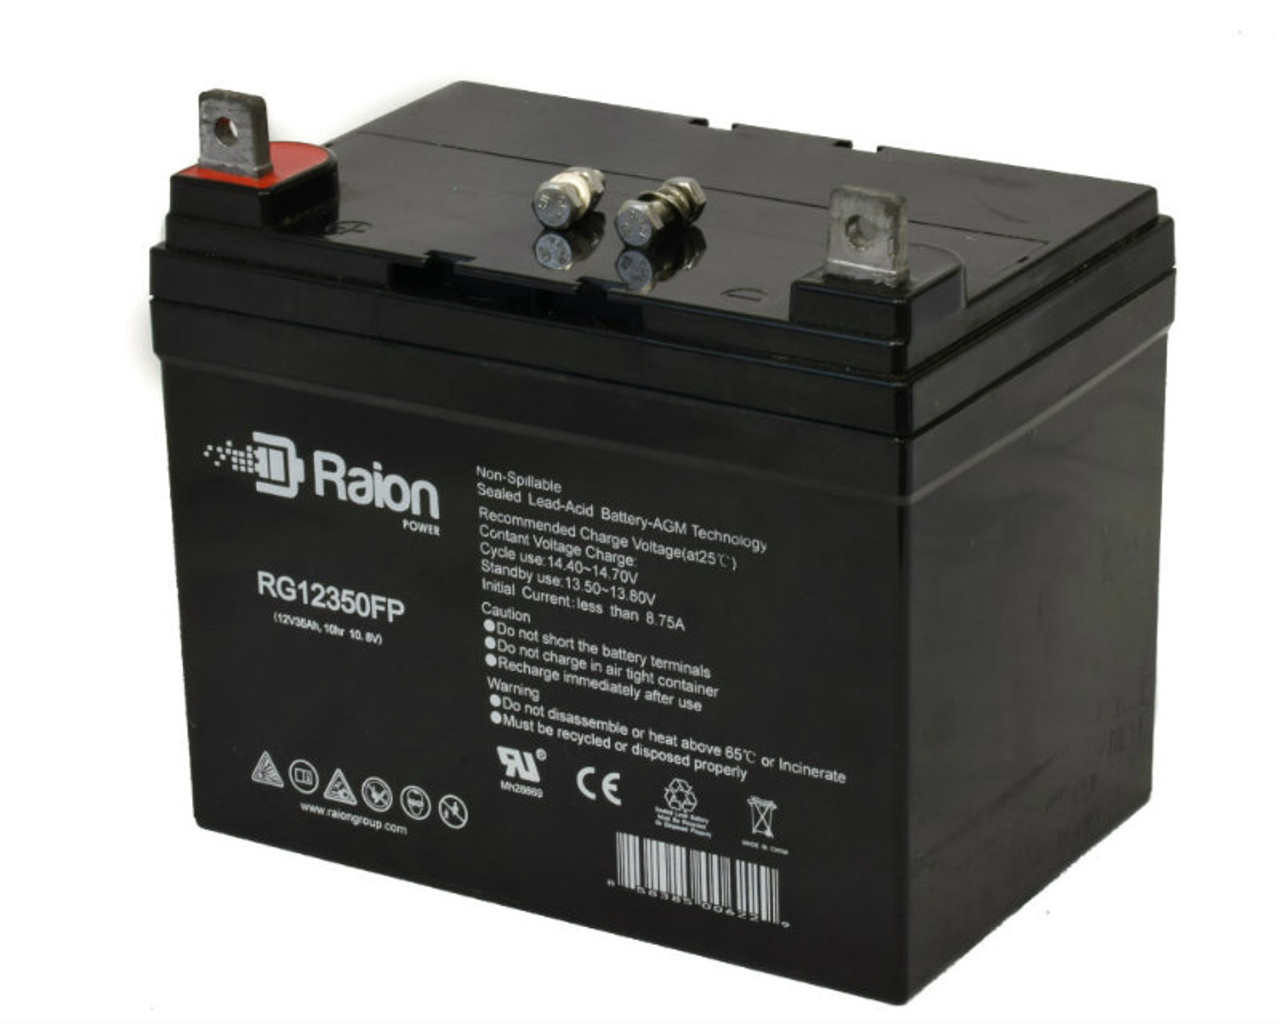 Raion Power Replacement 12V 35Ah RG12350FP Mobility Scooter Battery for Bruno Super Cub 46